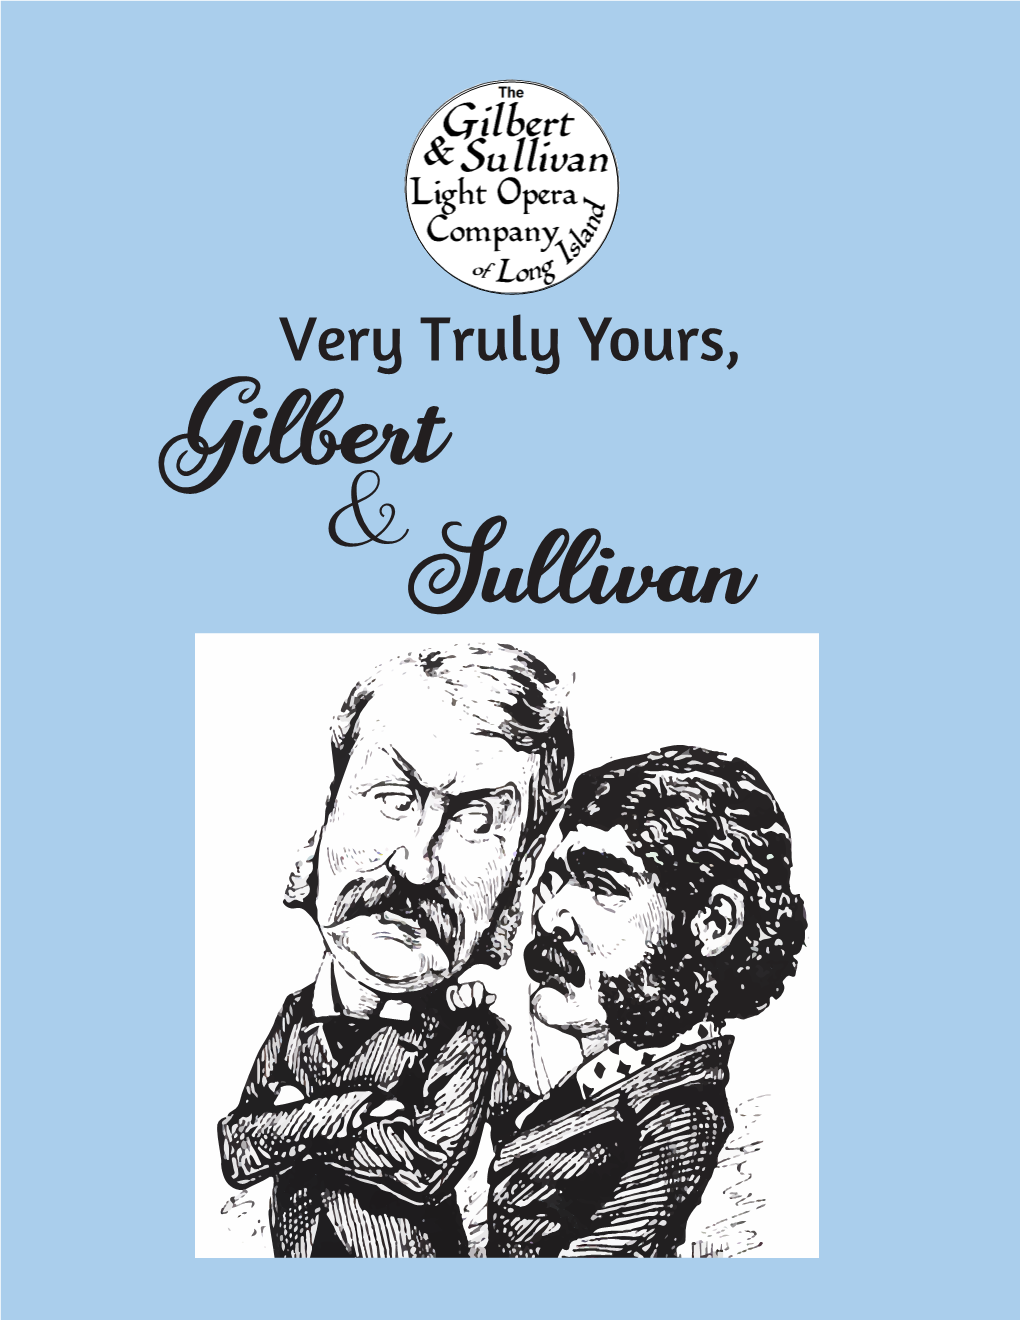 Very Truly Yours, Gilbert & Sullivan Notes from the Author